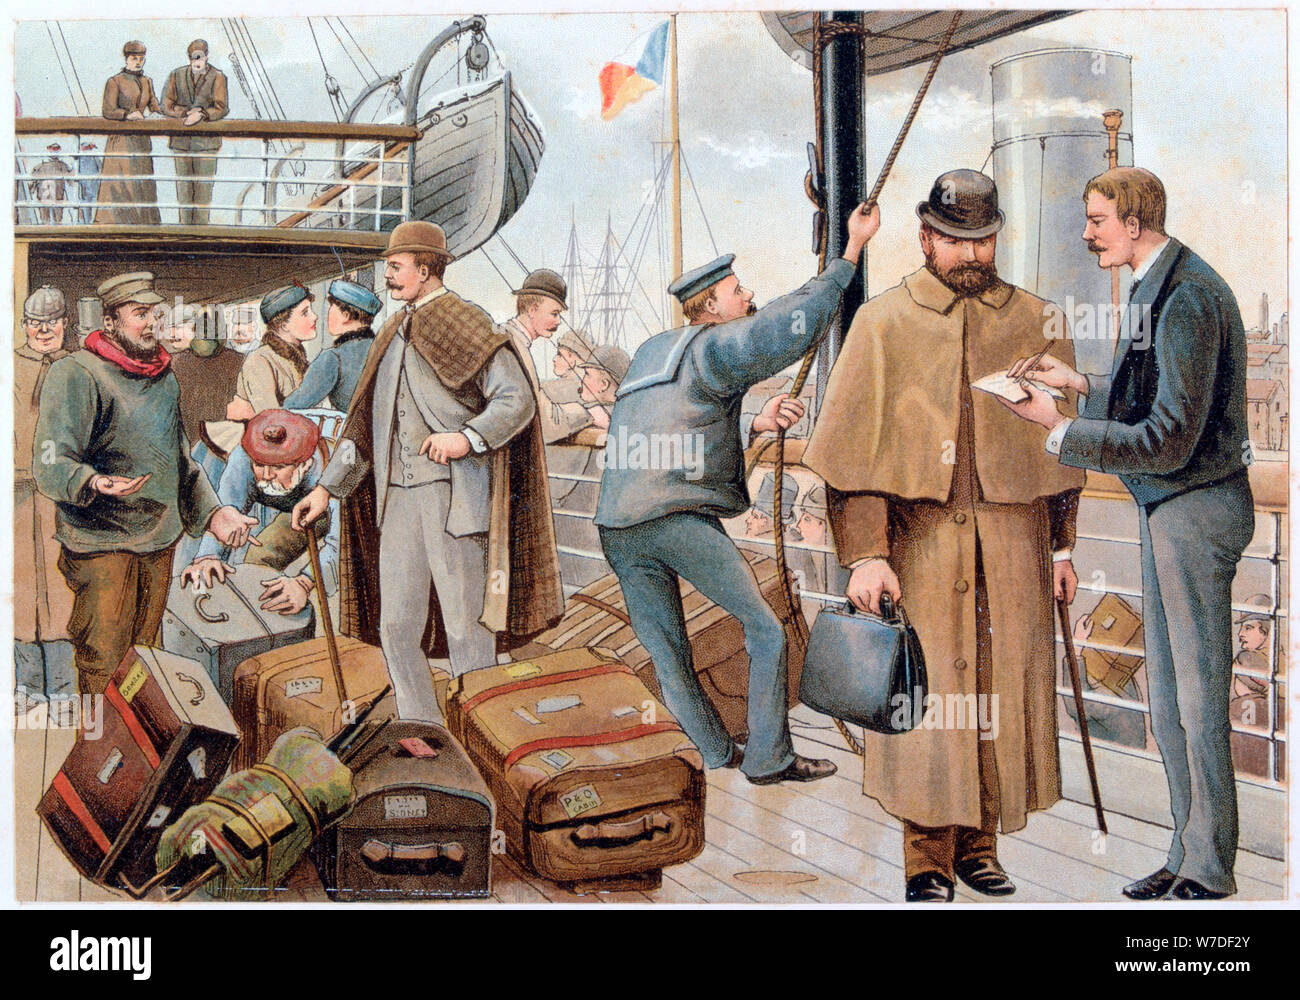 Passengers joining a P&O liner in the Thames, c1890.  Artist: P&O Pencillings Stock Photo